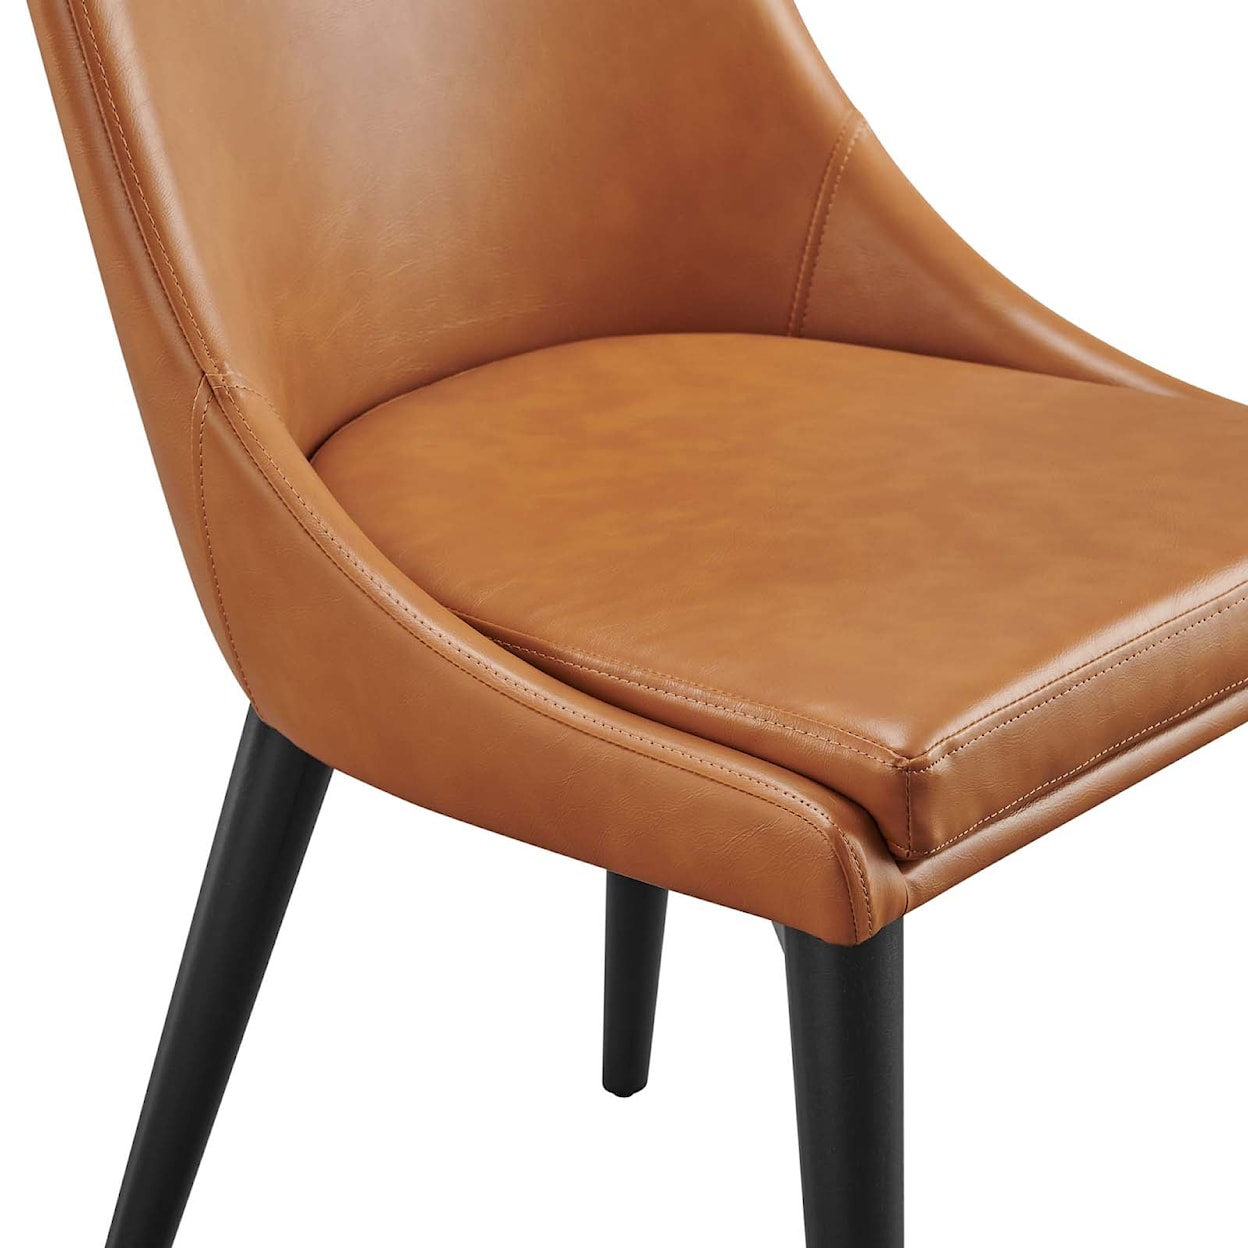 Modway Viscount Viscount Dining Chair